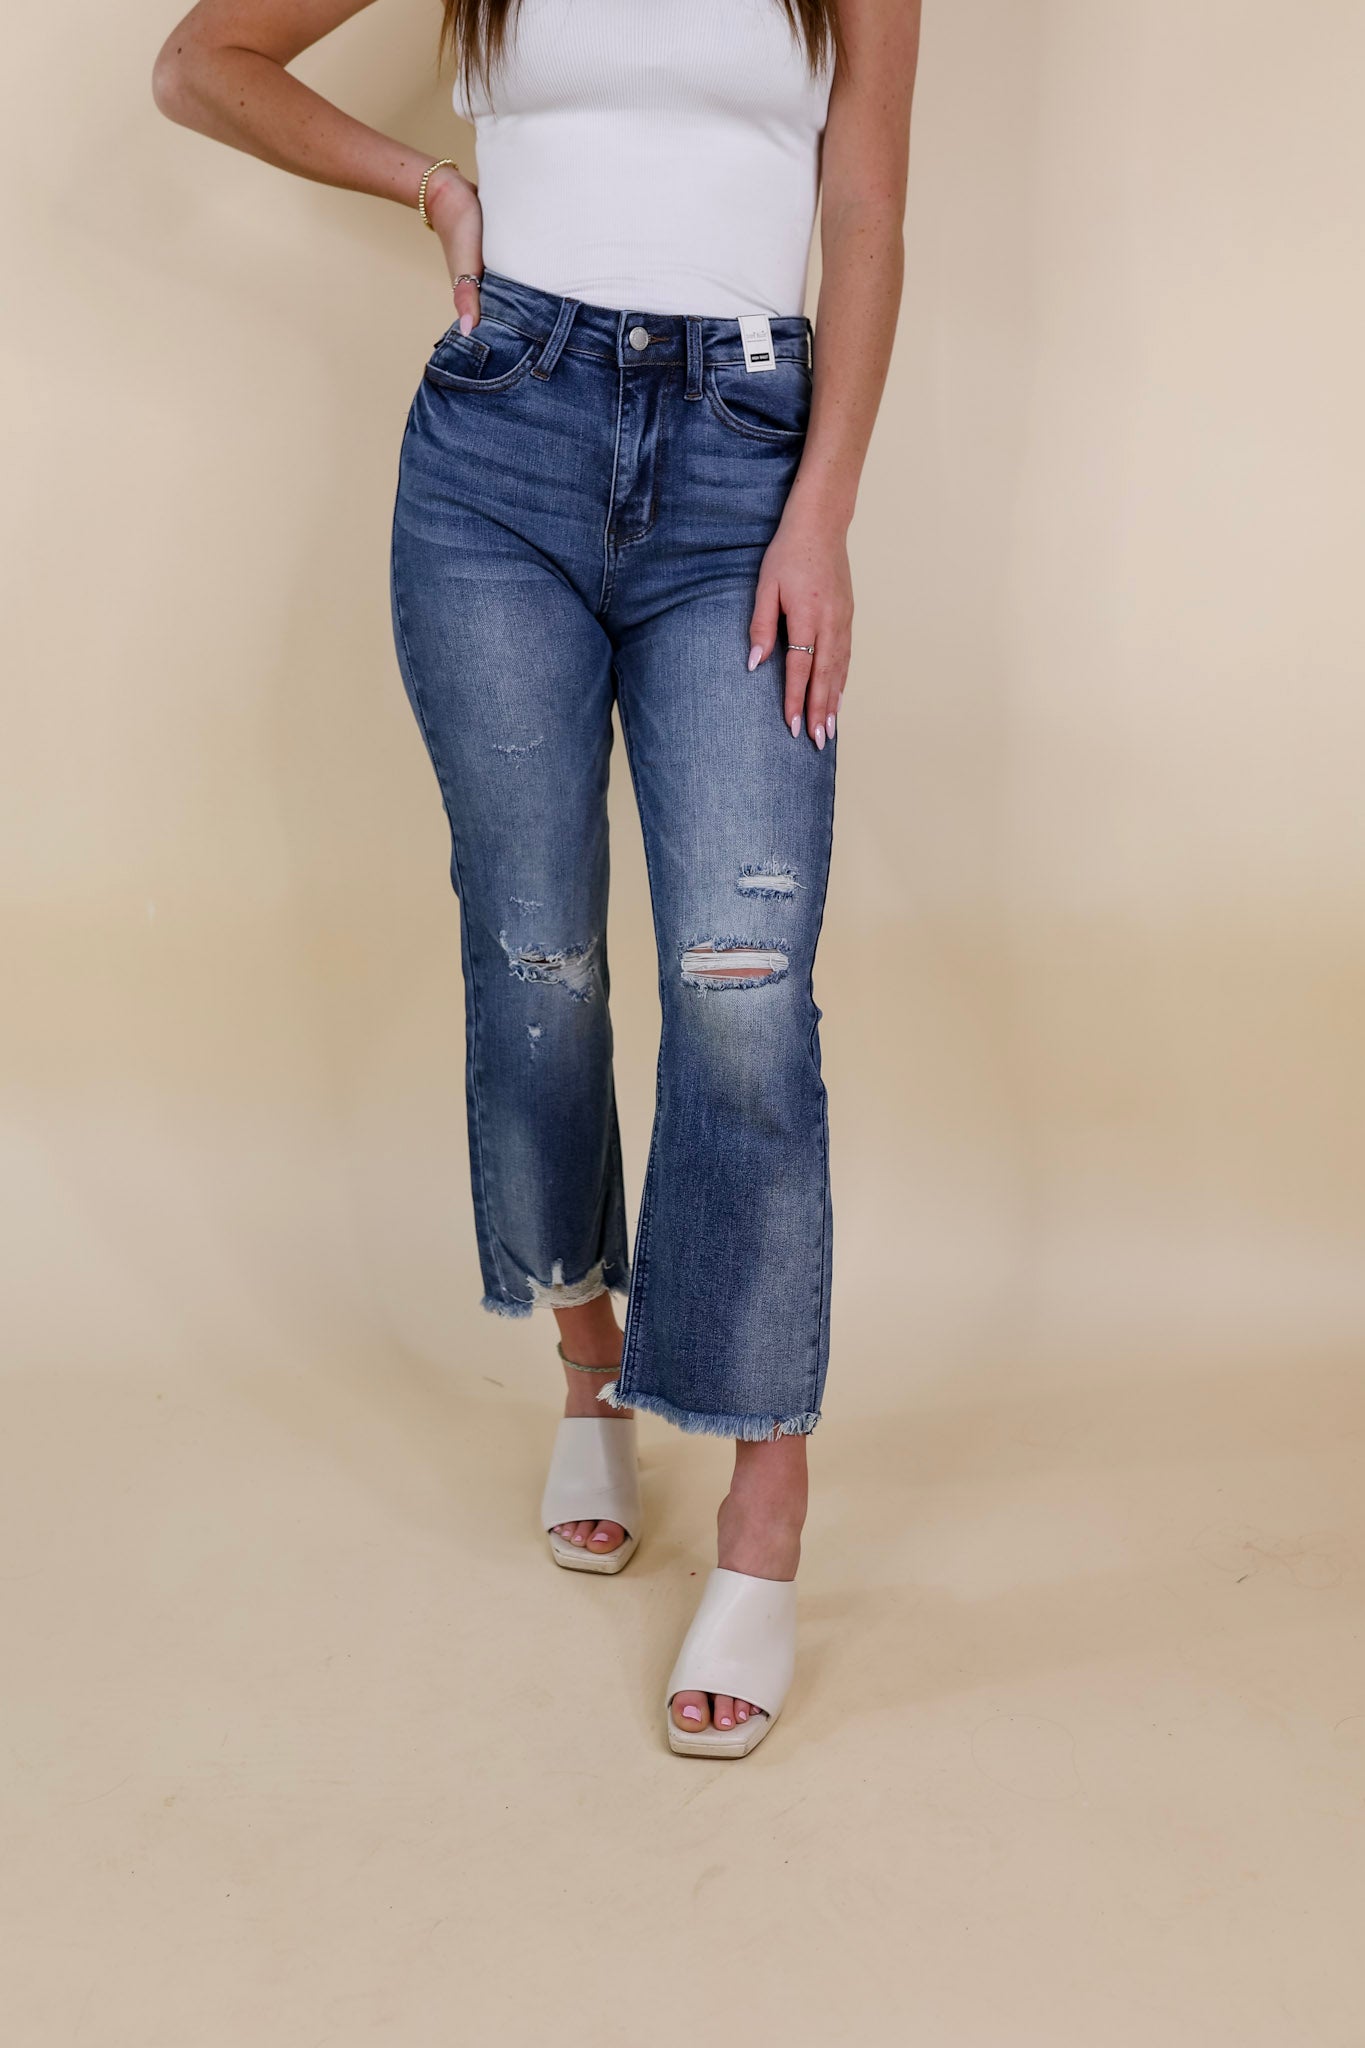 Judy Blue | Iconic Crush Destroy Cropped Straight Jeans in Medium Wash - Giddy Up Glamour Boutique